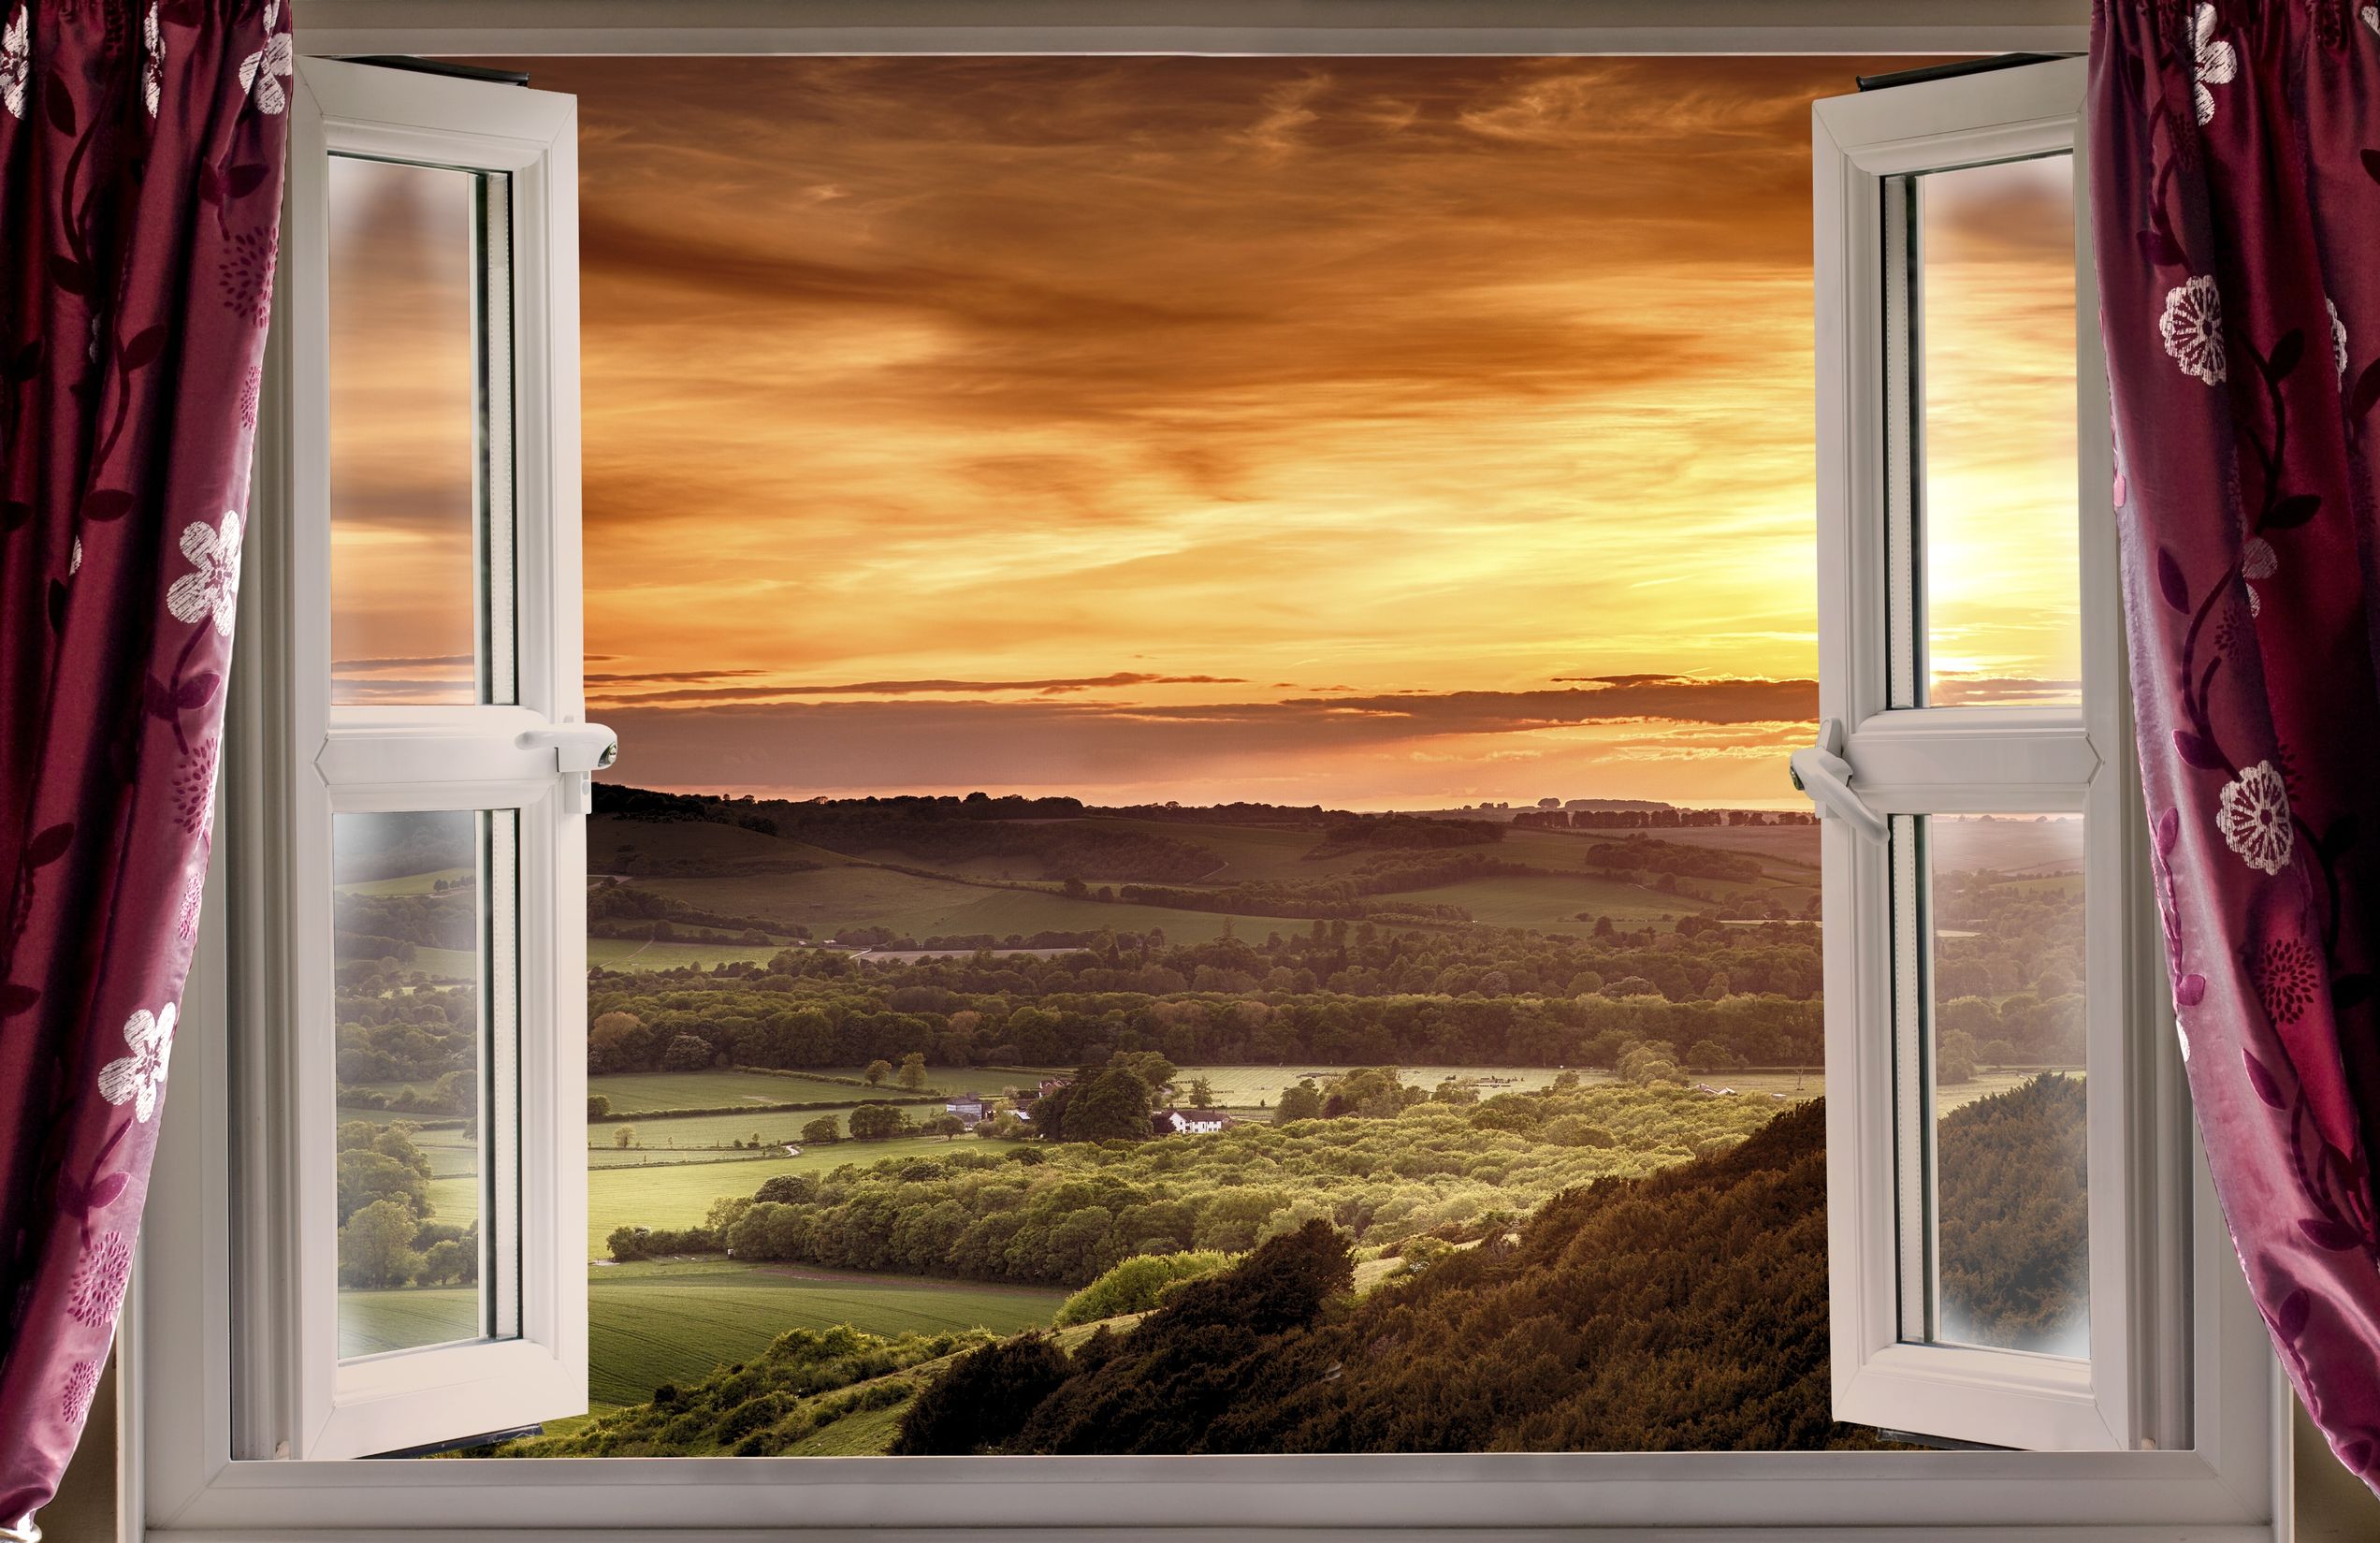 open window with a sunset view